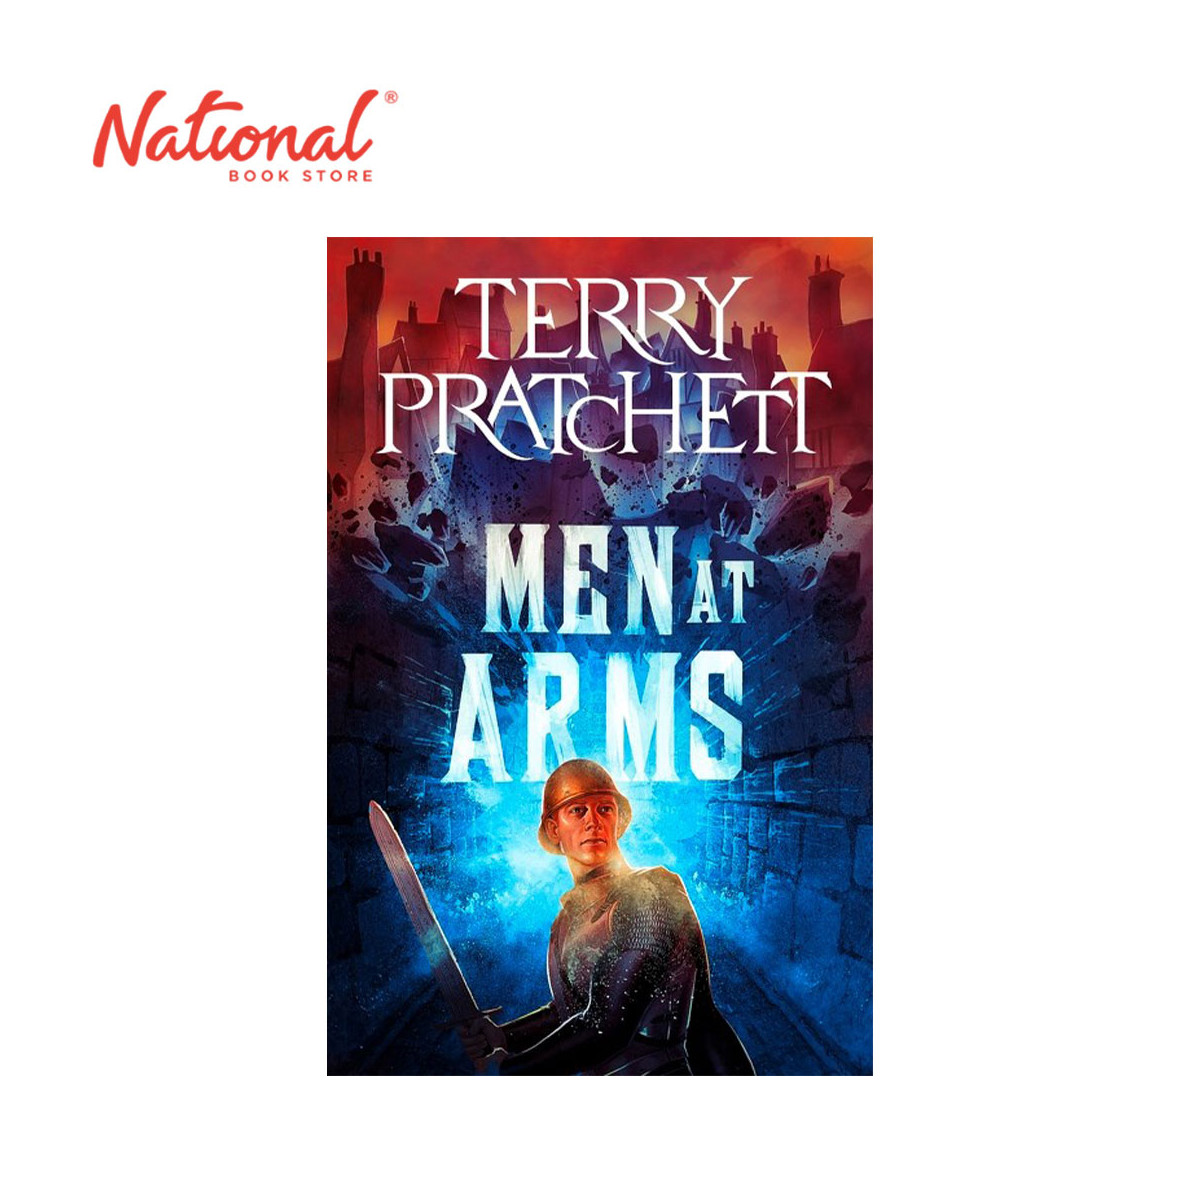 *PRE-ORDER* Men At Arms by Terry Pratchett - Trade Paperback - Sci-Fi, Fantasy & Horror